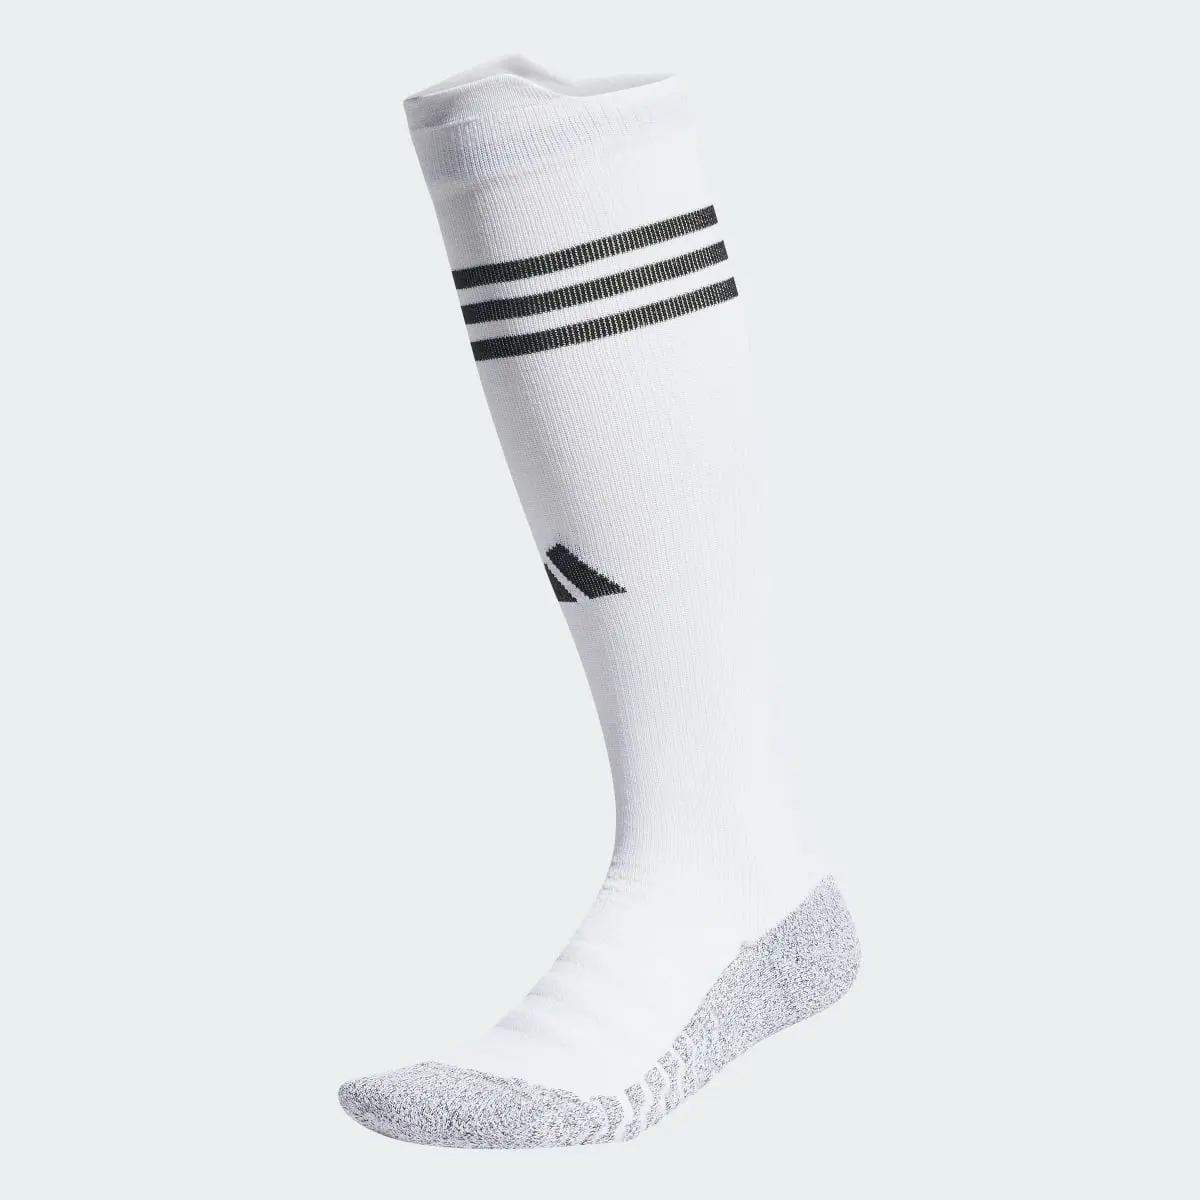 Adidas Chaussettes montantes All Blacks Rugby. 1